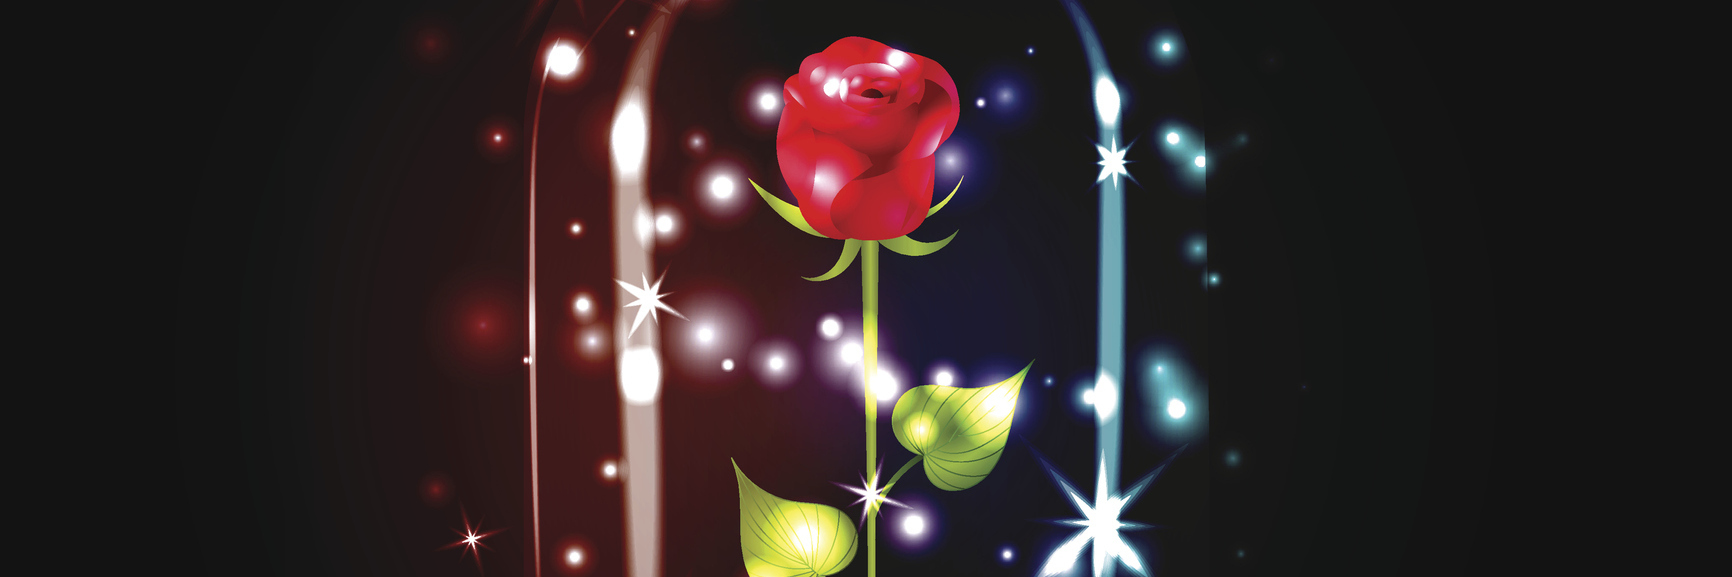 A red rose with sparkle under a glass dome on black background